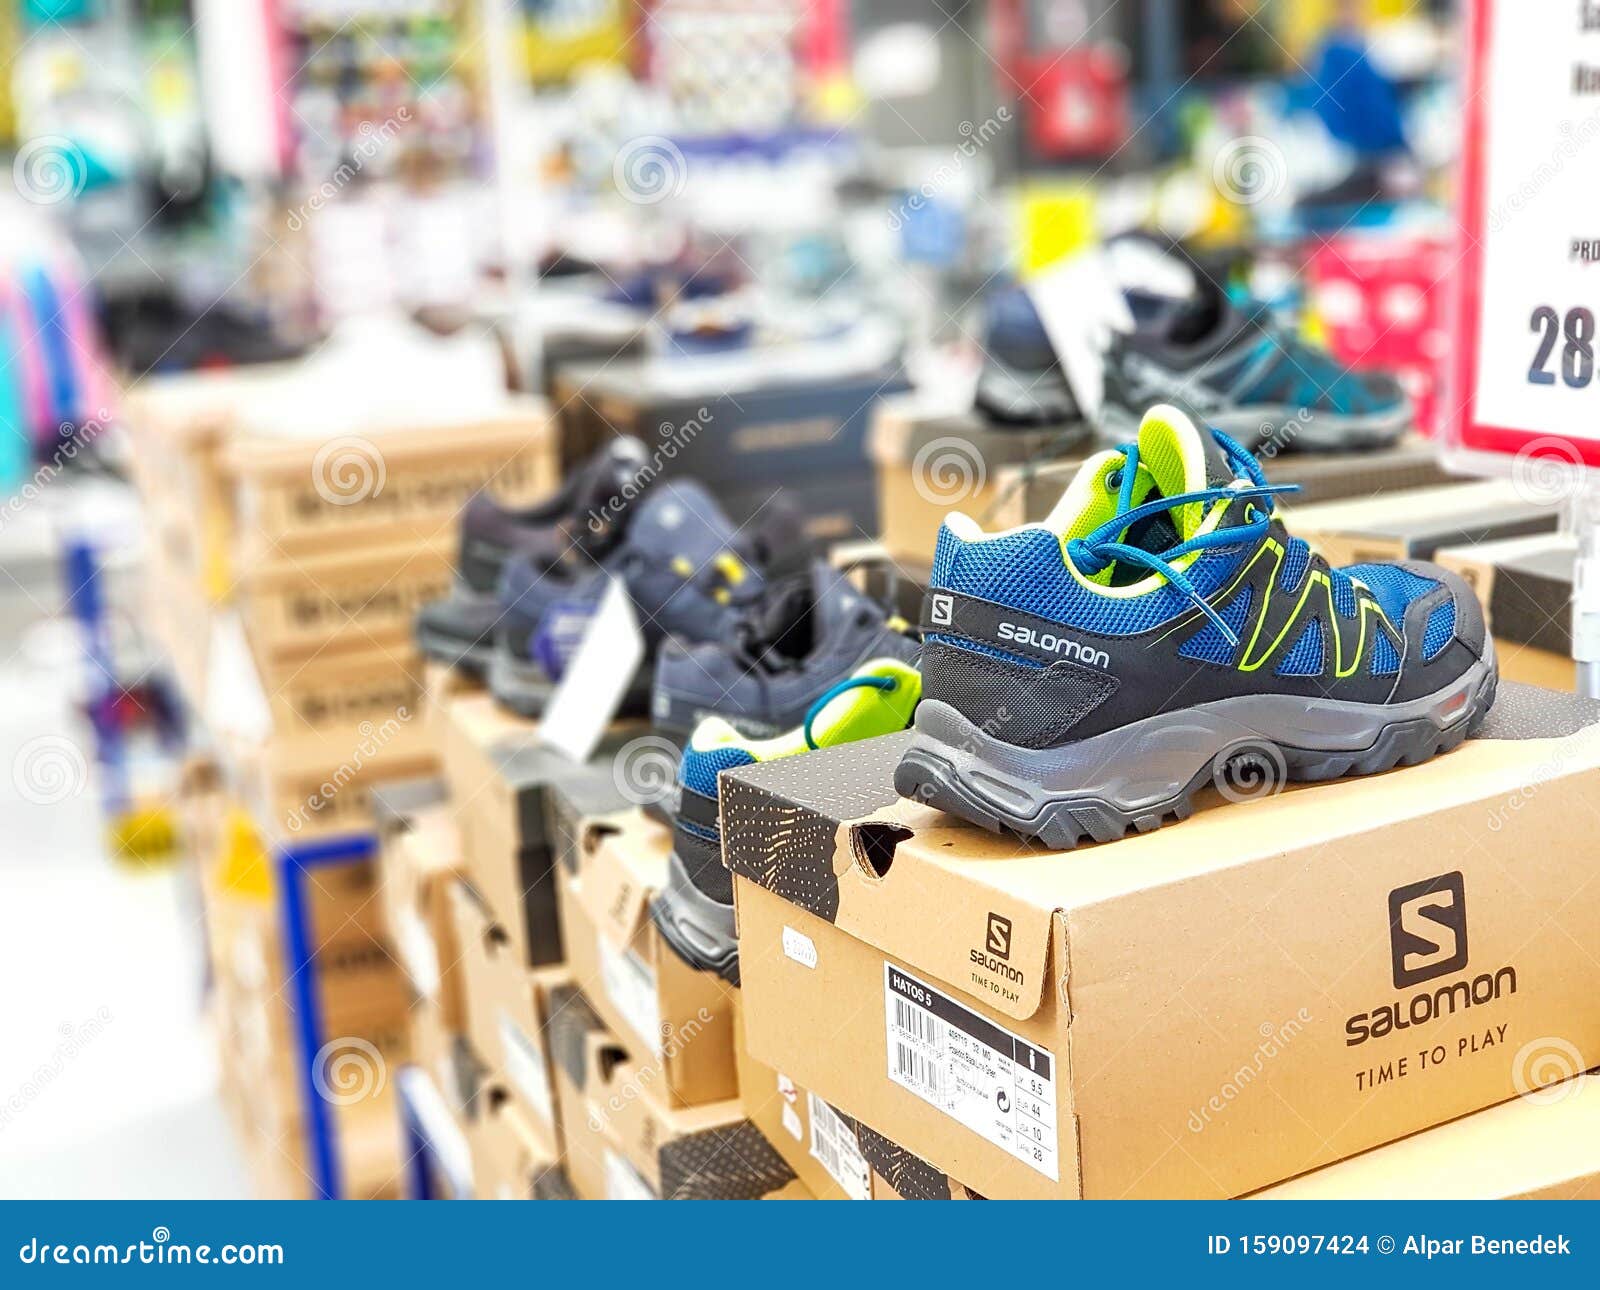 Salomon Sport in Local Depth of Field. Editorial Stock Image - Image of manufacturing, retail: 159097424